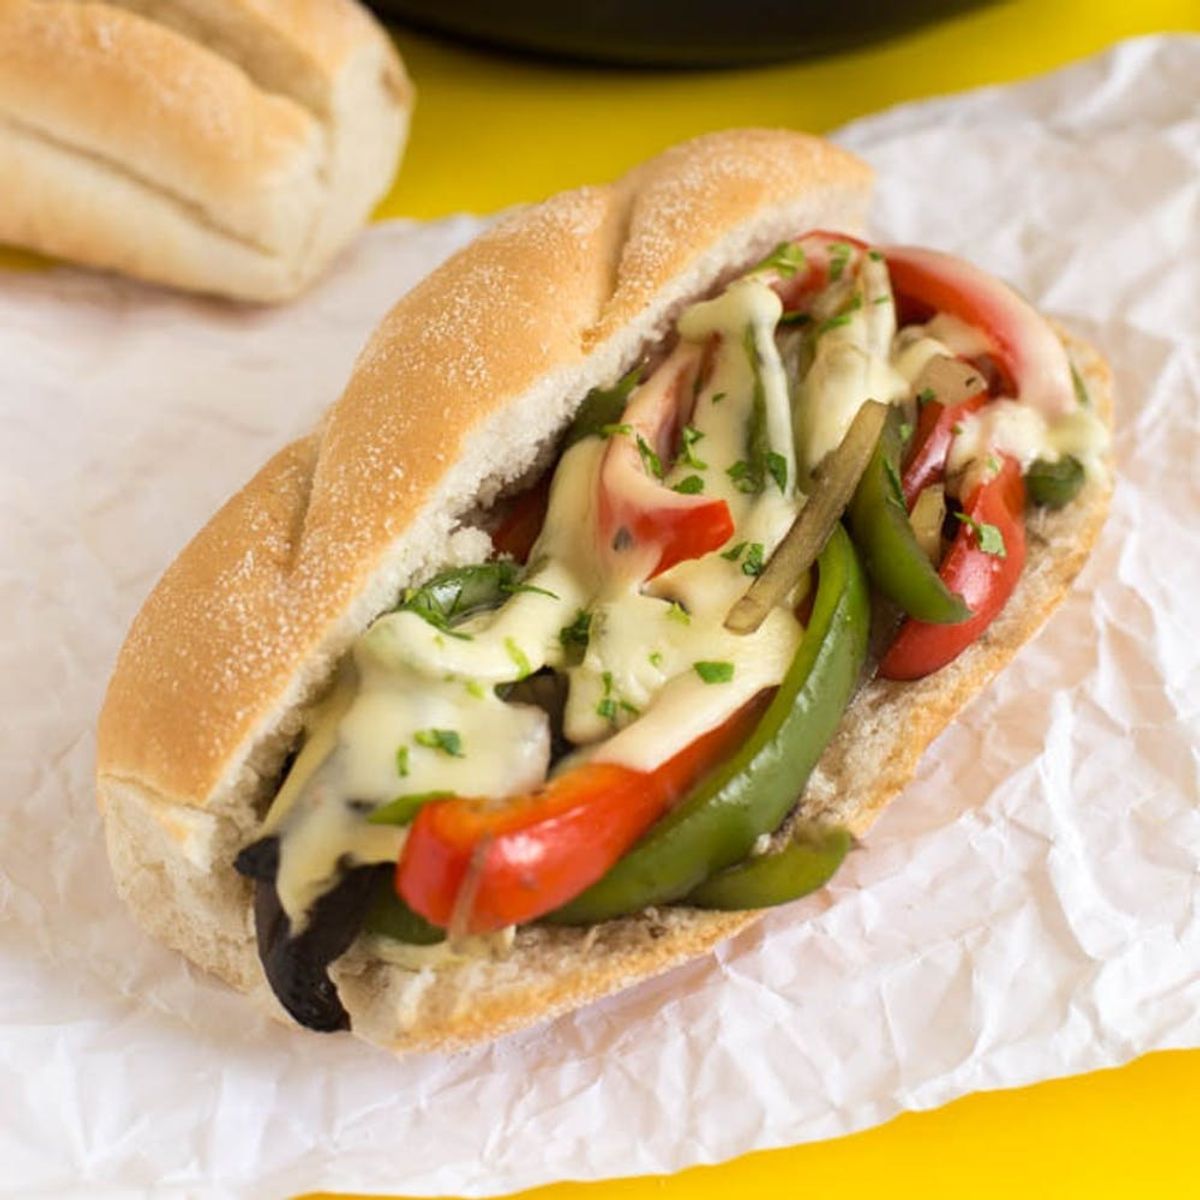 Meet Your New Fave Lunch: Veggie Cheesesteak Sandwiches